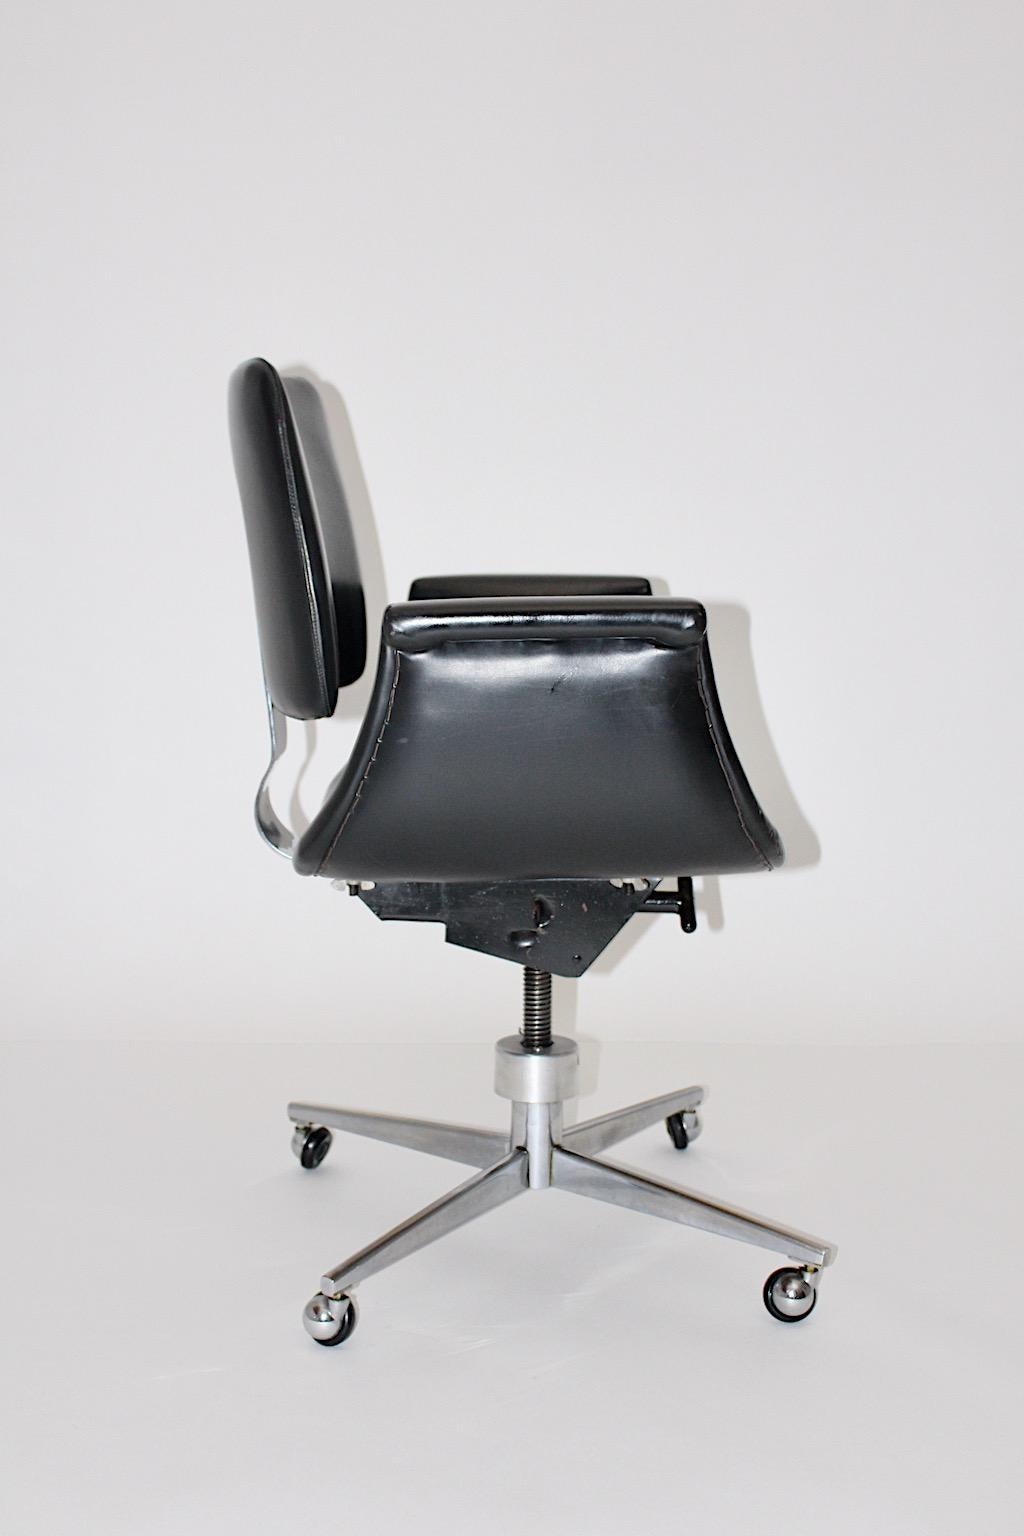 space age desk chair